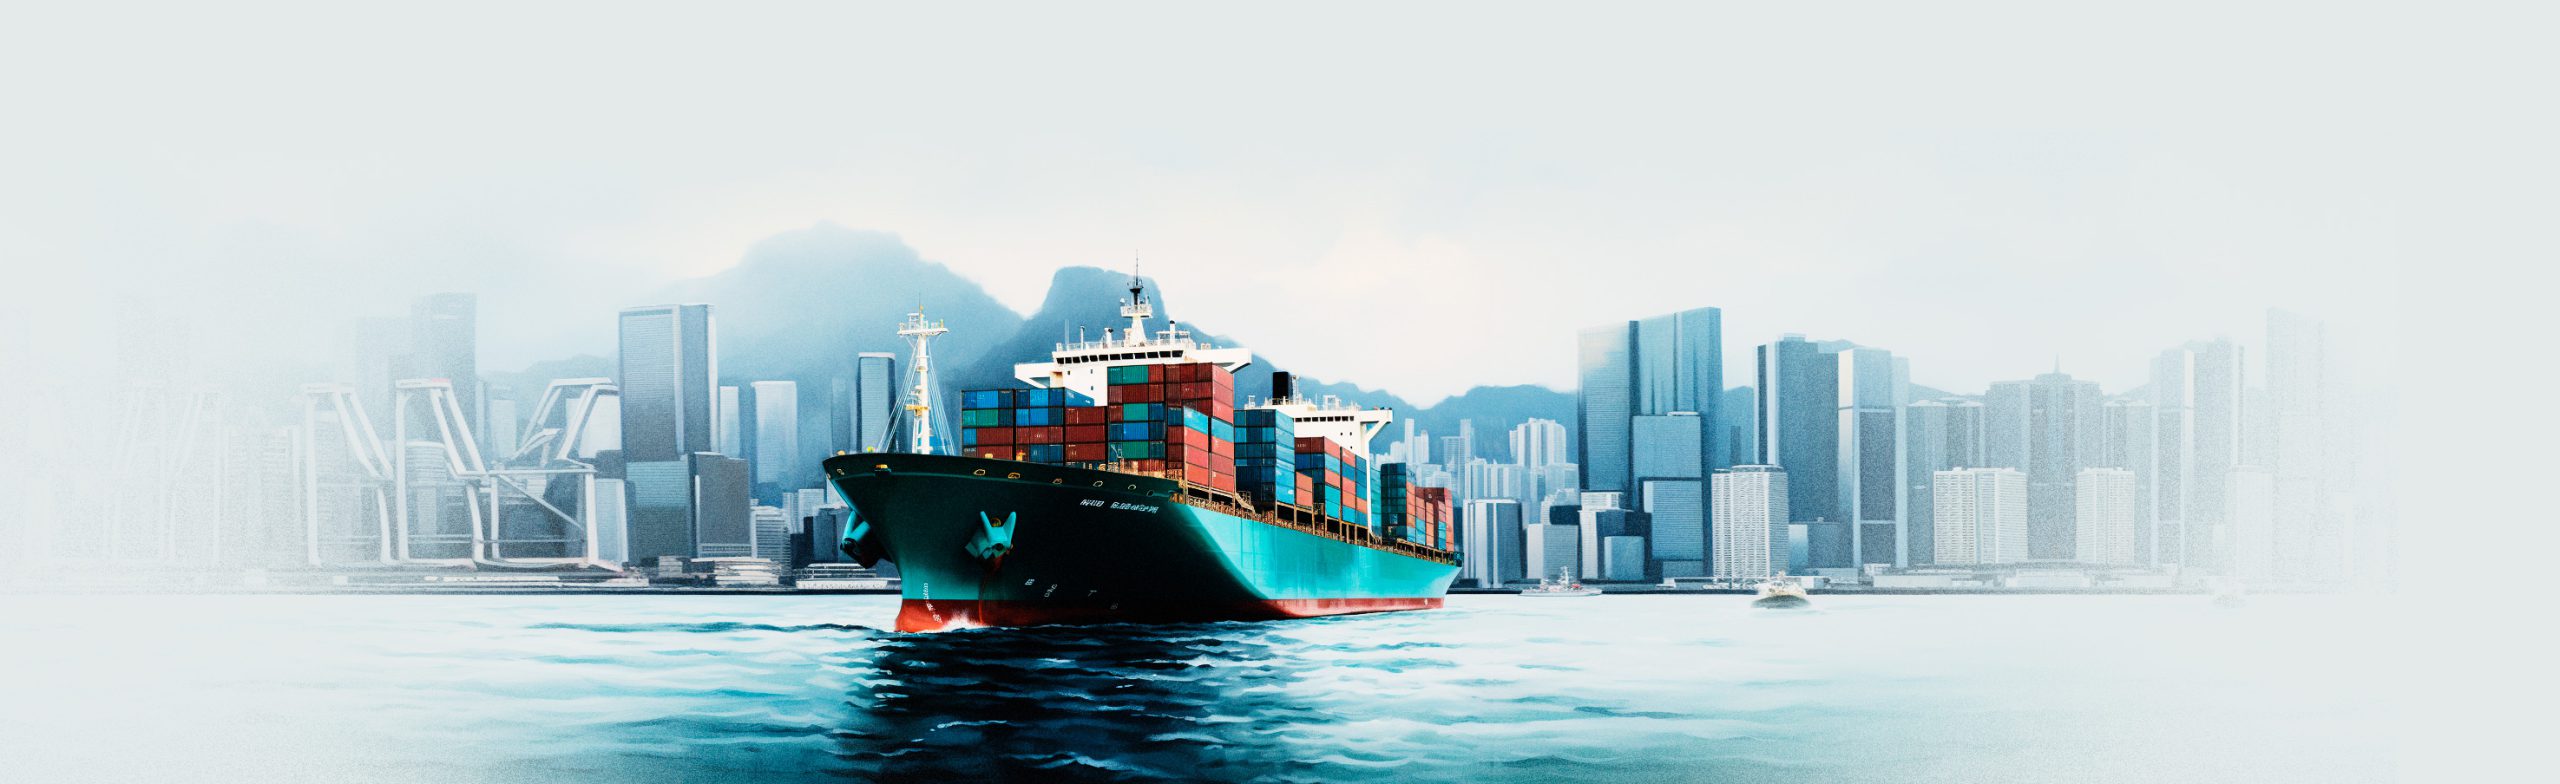 illustration import ship with city behind Product Inspection Services